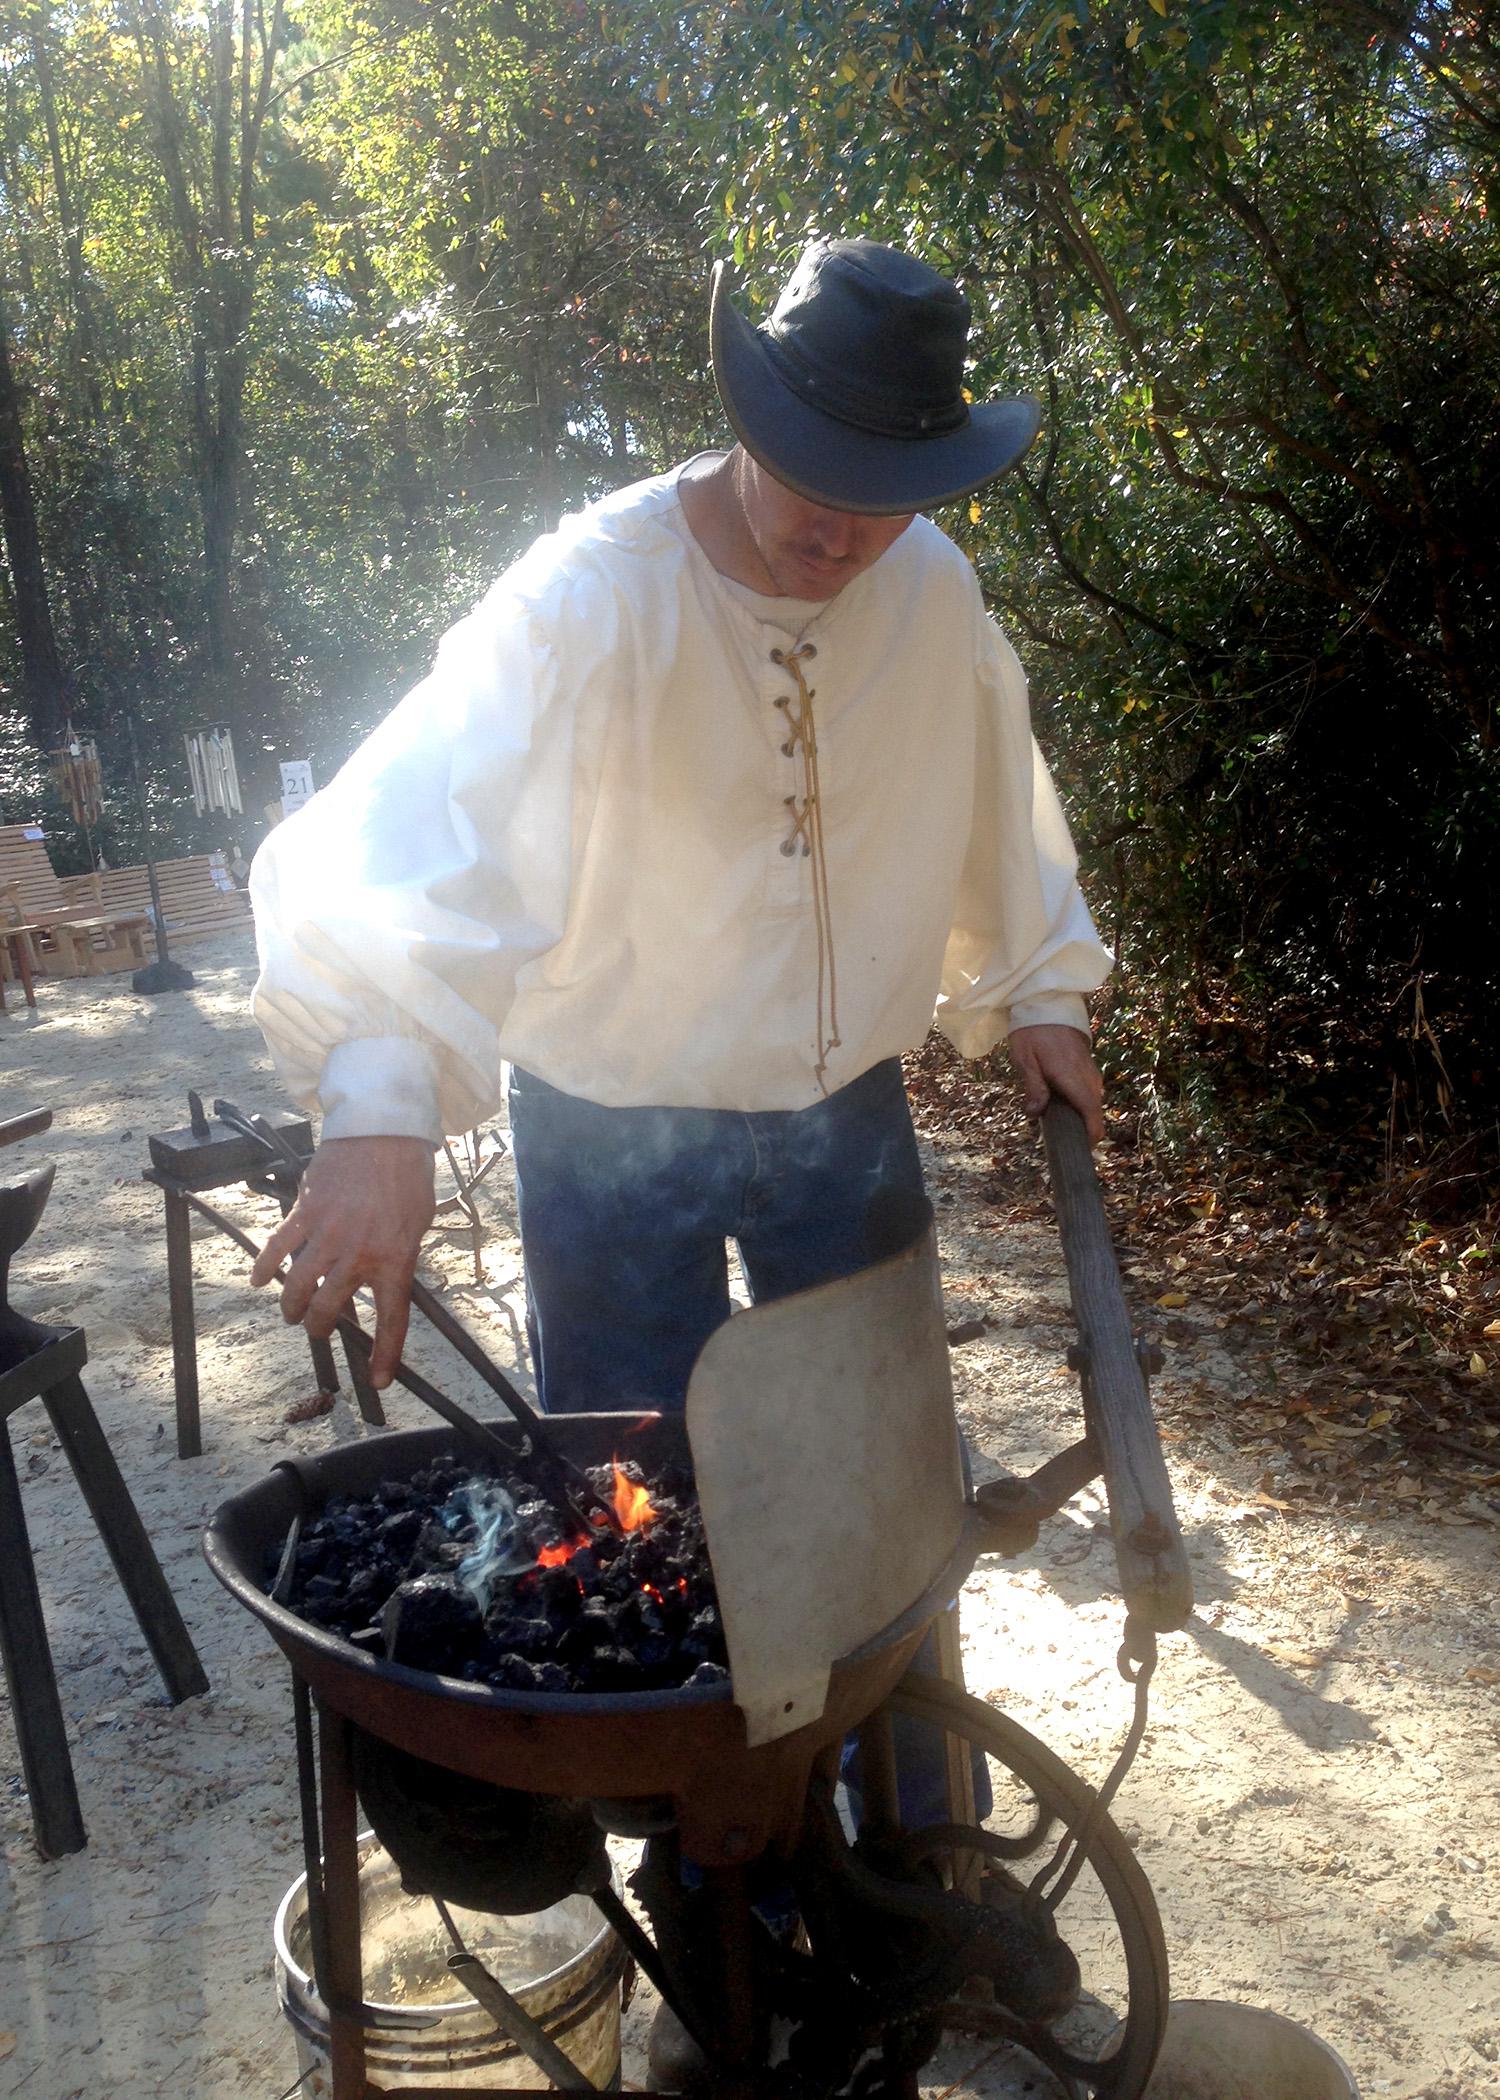 Blacksmith Chuck Averett demonstrates his skill on an authentic 1860s forge during last year's Forge Day at the MSU Crosby Arboretum in Picayune. The 2015 Forge Day is set for Jan. 31 from 10 a.m. to 2 p.m. (Photo by MSU Extension Service/Pat Drackett)